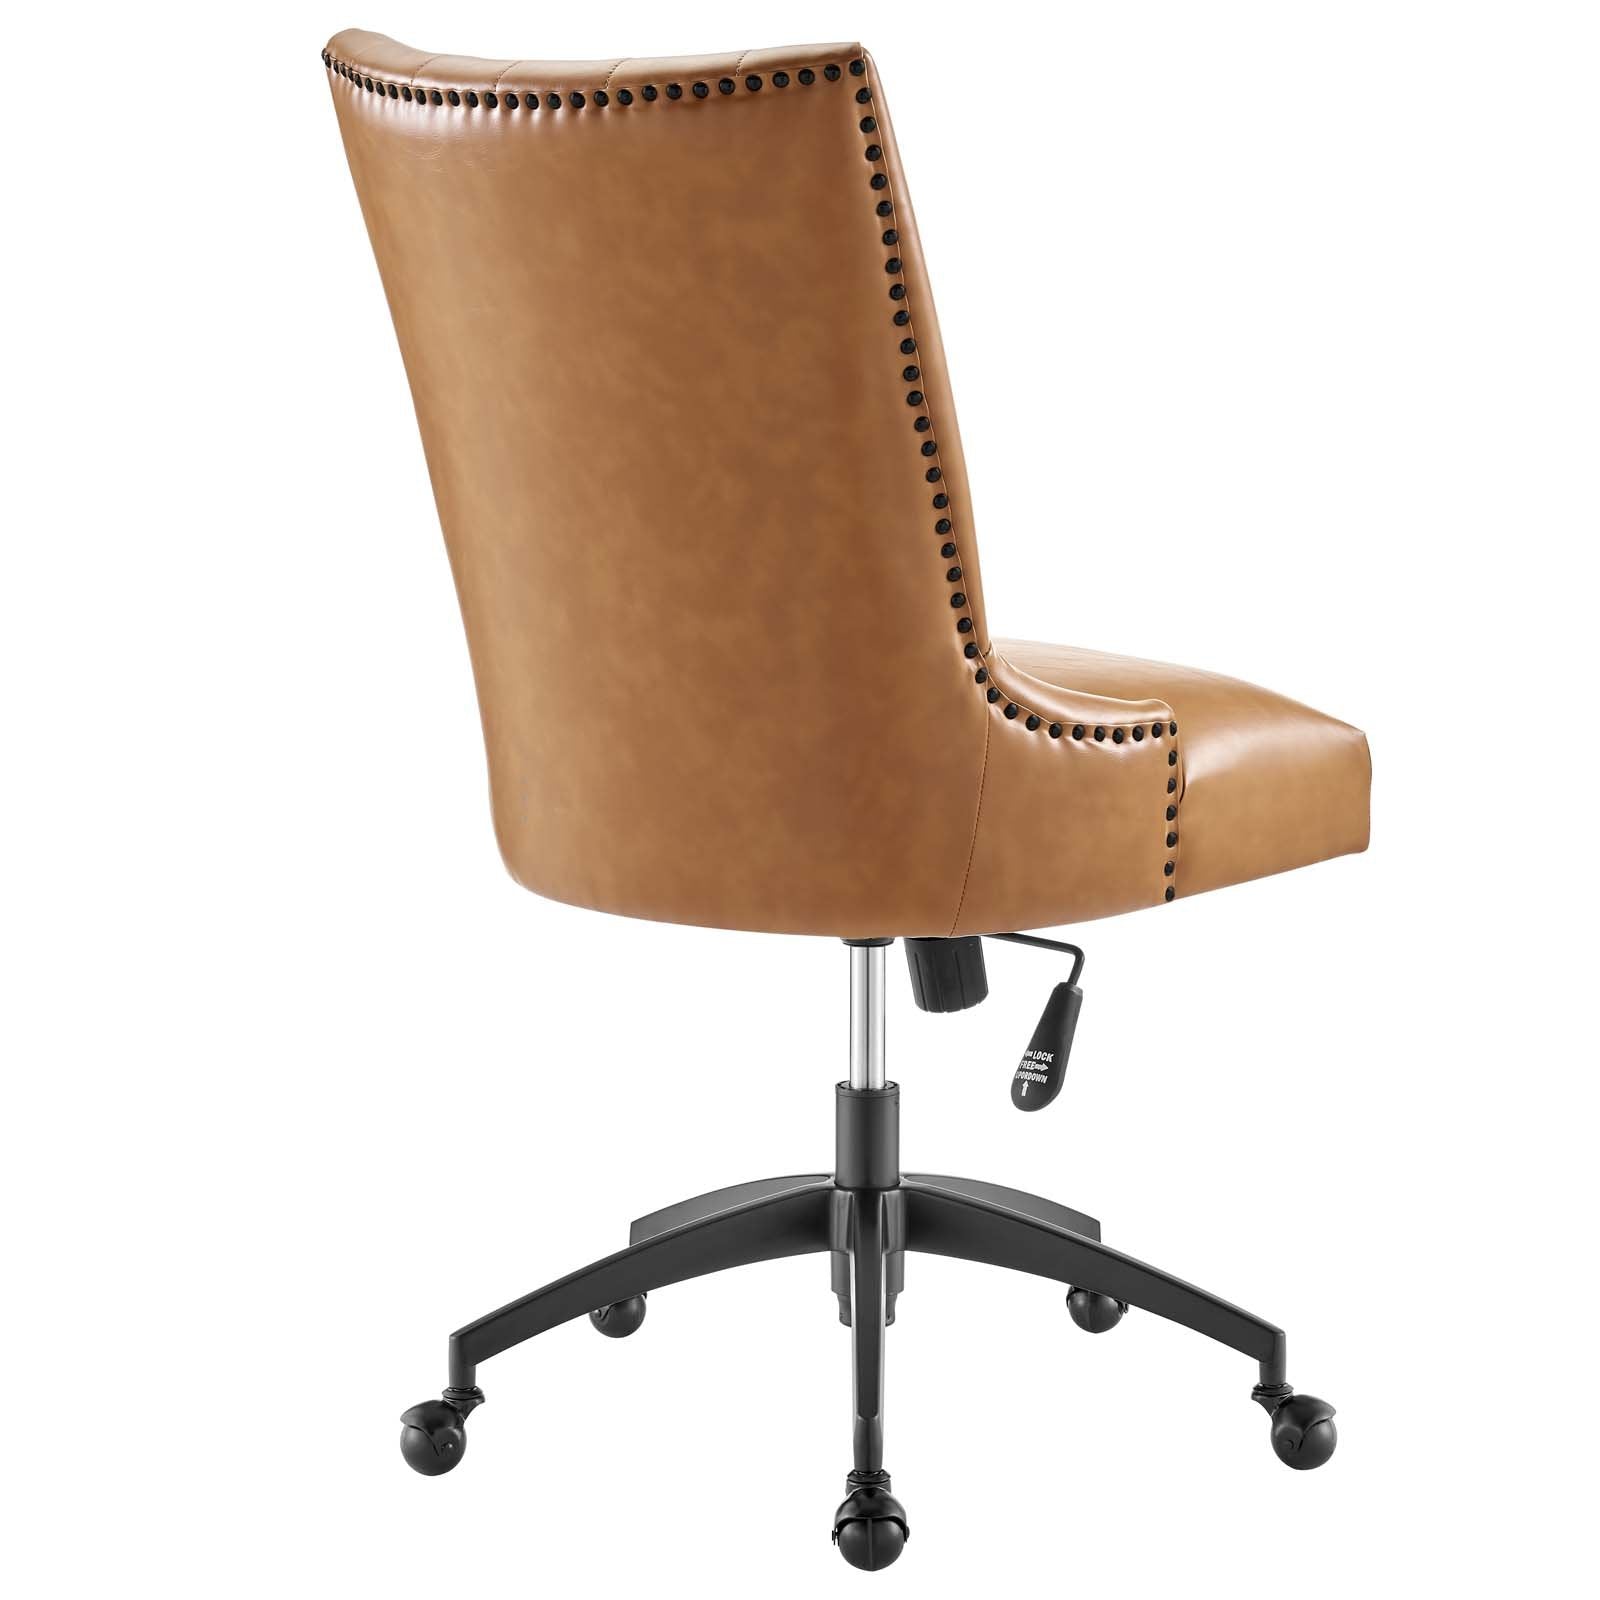 Empower Channel Tufted Vegan Leather Office Chair - East Shore Modern Home Furnishings